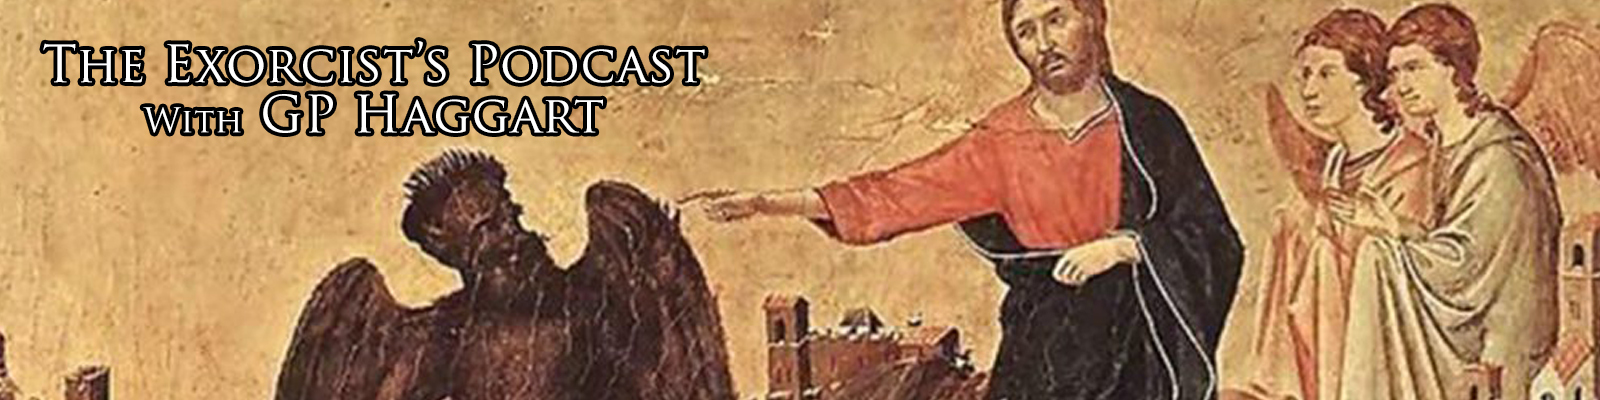 The Exorcist‘s Podcast